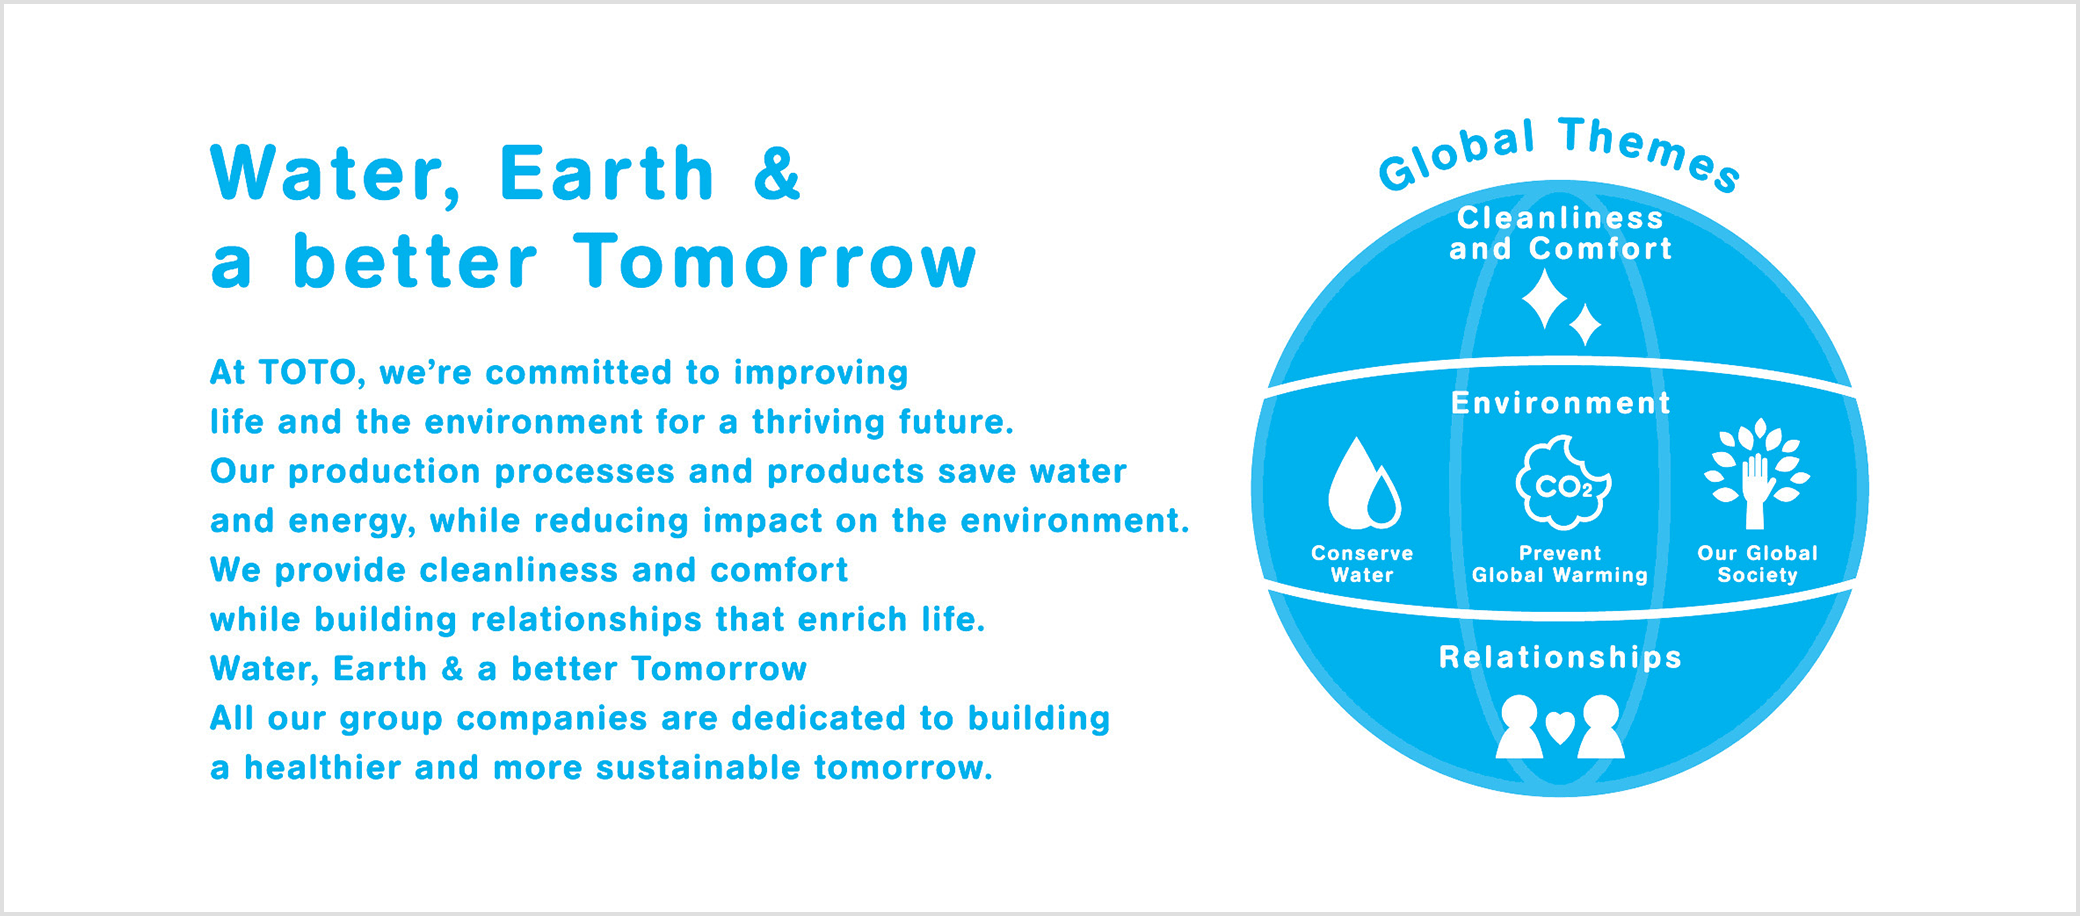 Water, Earth & a better Tomorrow. At TOTO, we’re committed to improving life and the environment for a thriving future. Our production processes and products save water and energy, while reducing impact on the environment. We provide cleanliness and comfort while building relationships that enrich life. Water, Earth & a better Tomorrow. All our group companies are dedicated to building a healthier and more sustainable tomorrow. Global Themes: Cleanliness and Comfort, Environment; Conserve water, Prevent Global Warming, Our Global Society, Relationships.